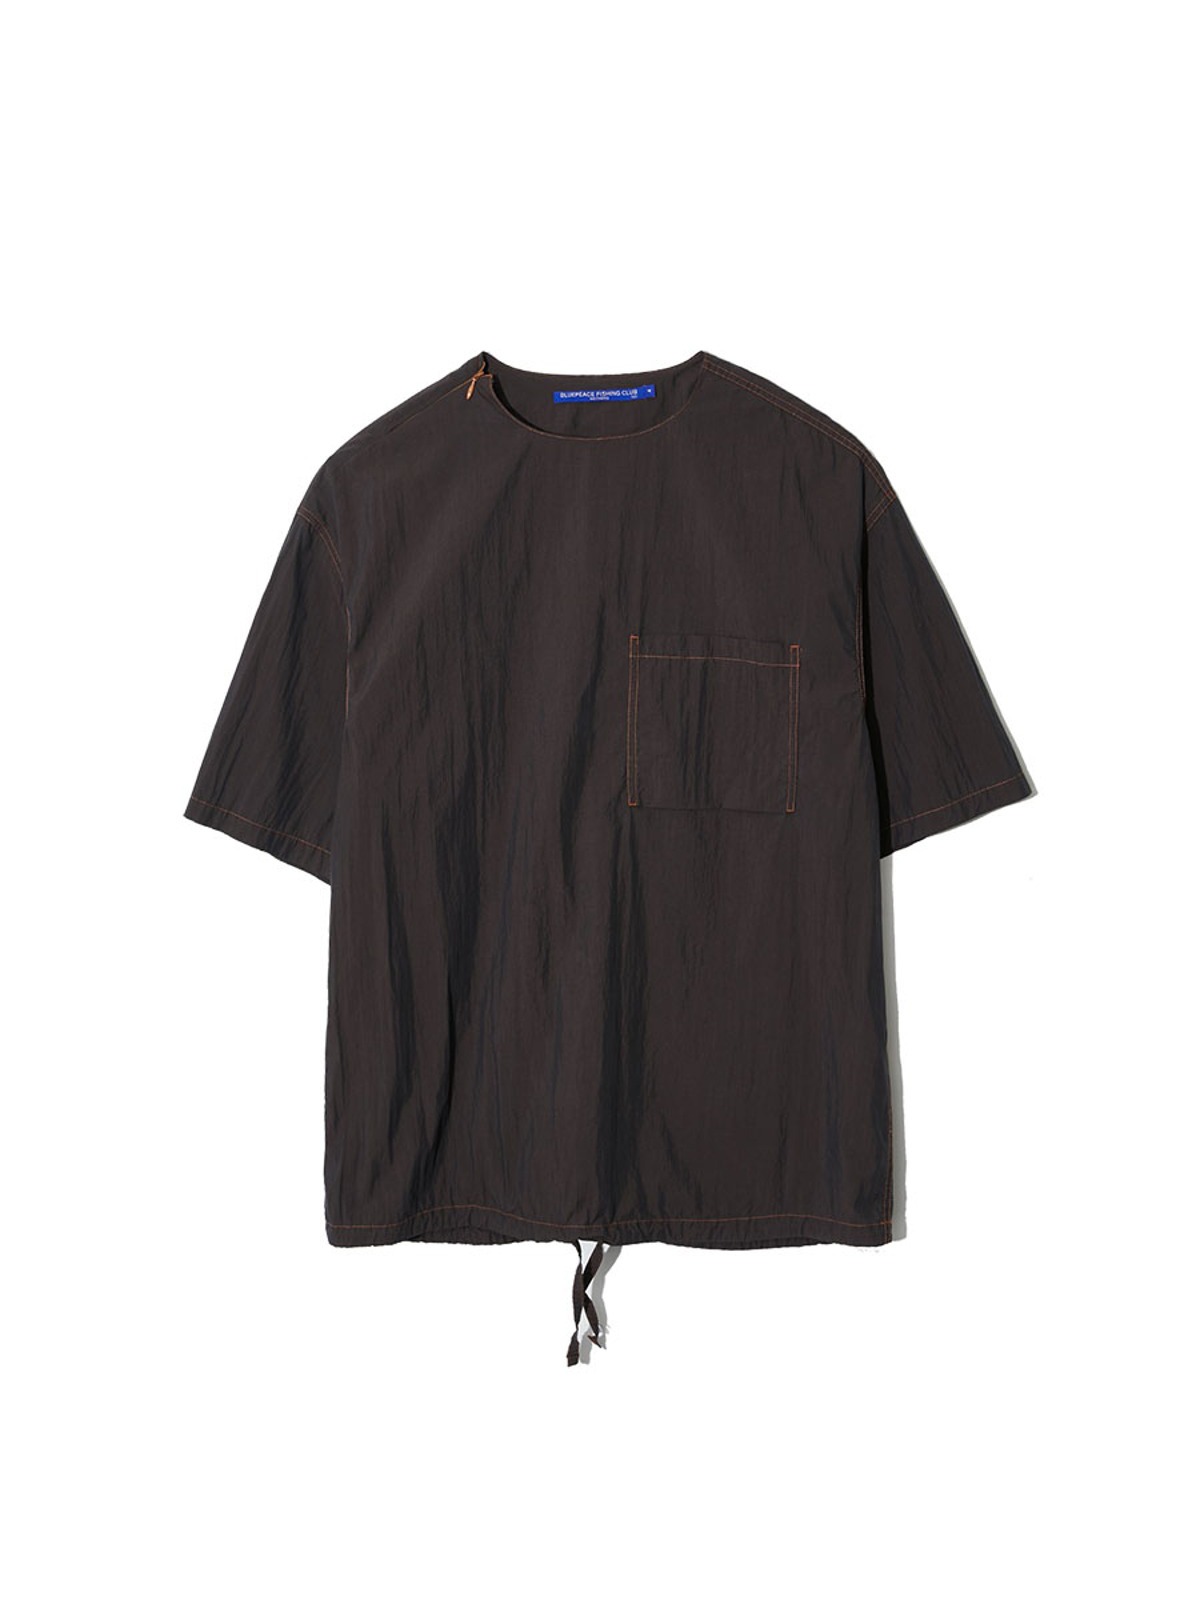 Garment Dyed Woven S/S T-Shirt (Chocolate)